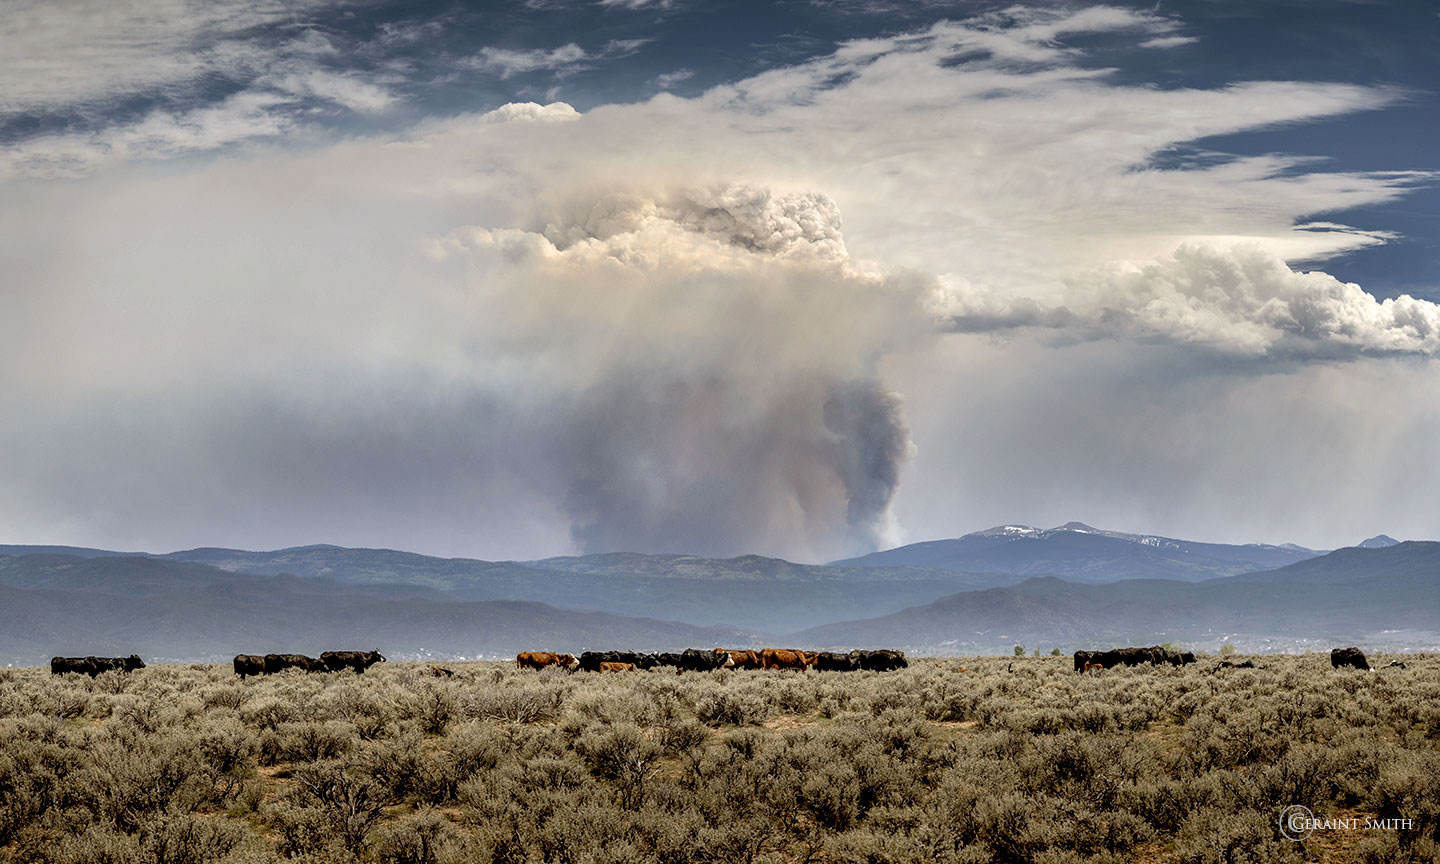 Cattle in the Taos Valley with the Calf Canyon, Hermits Peak Fire